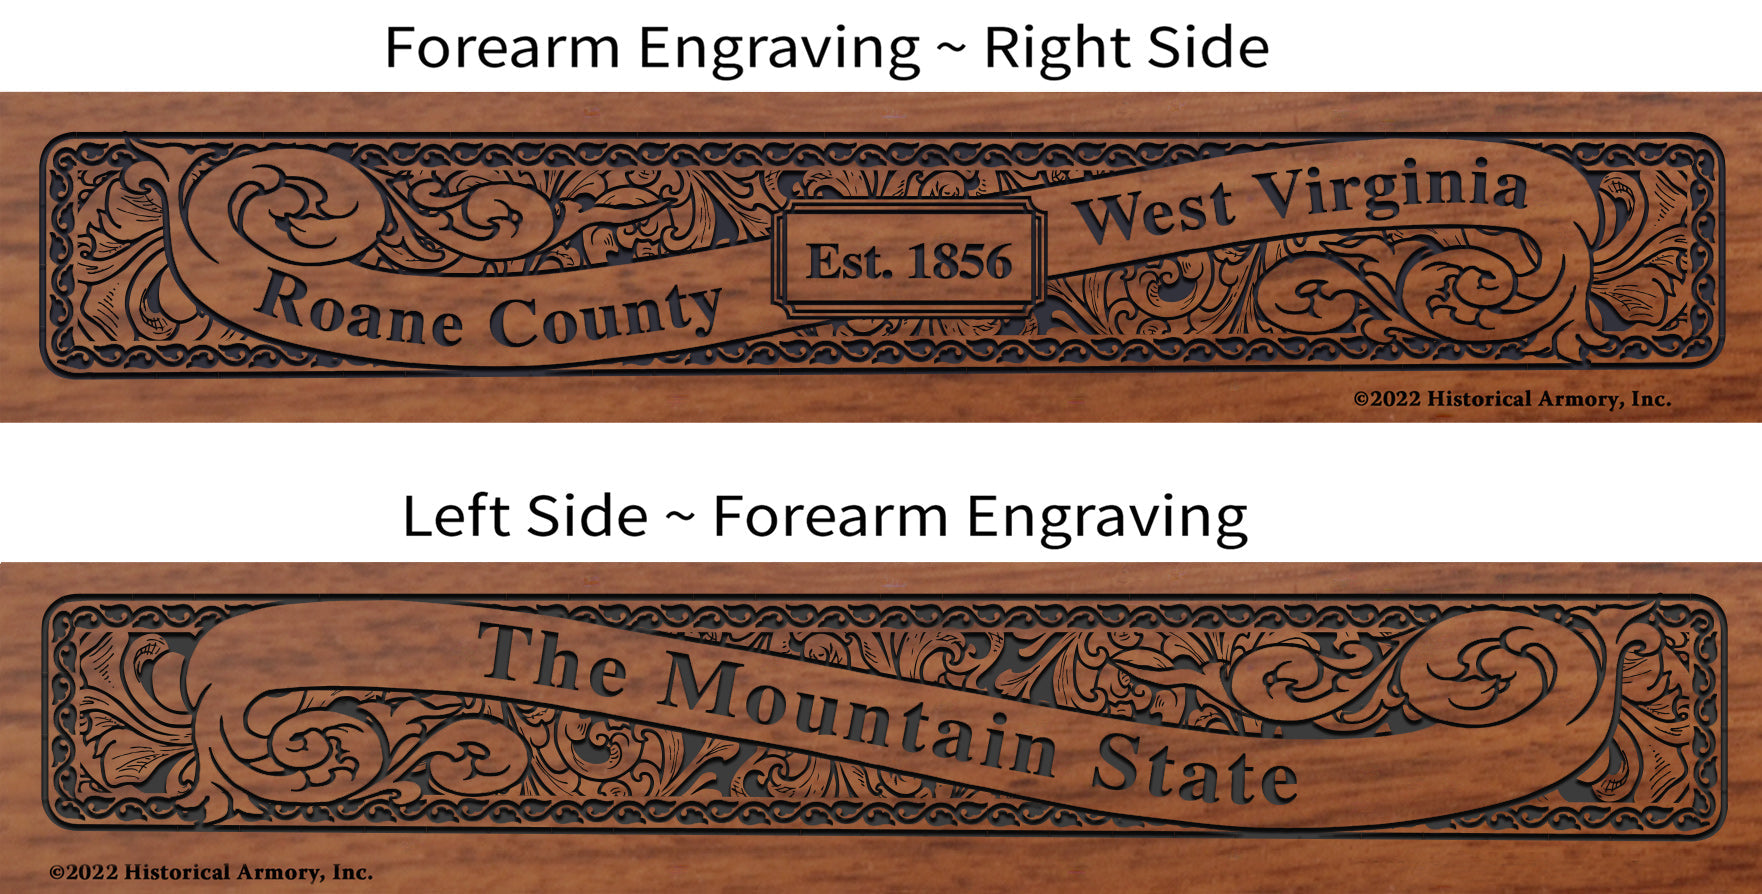 Roane County West Virginia Engraved Rifle Forearm